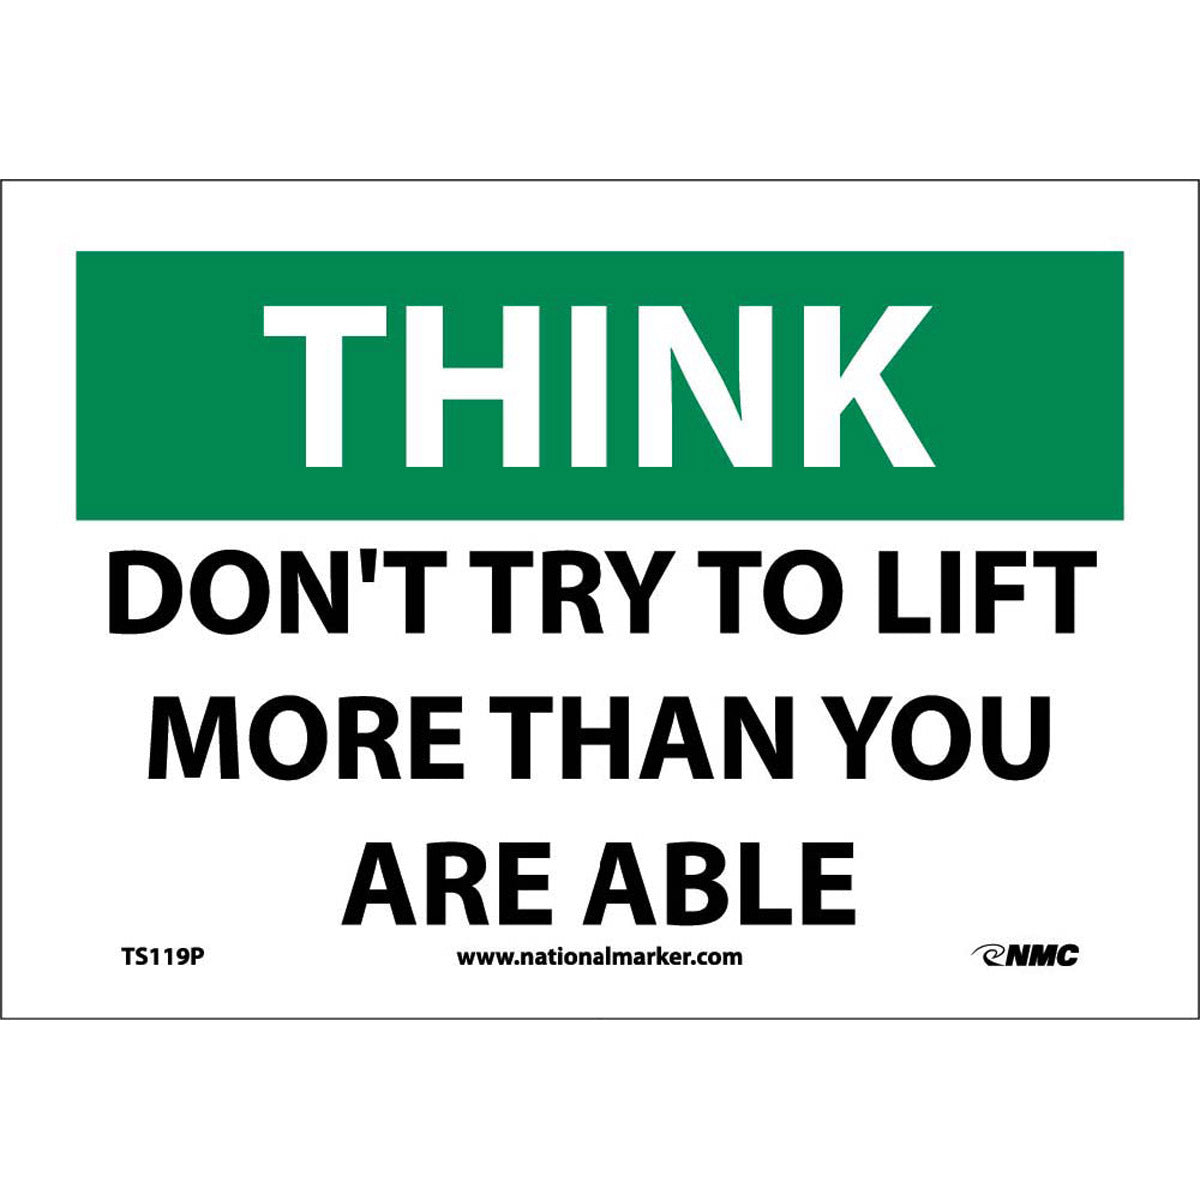 NM 7" X 10" White .0045" Pressure Sensitive Vinyl Safety Sign "THINK DON'T TRY TO LIFT MORE THAN YOU ARE ABLE"